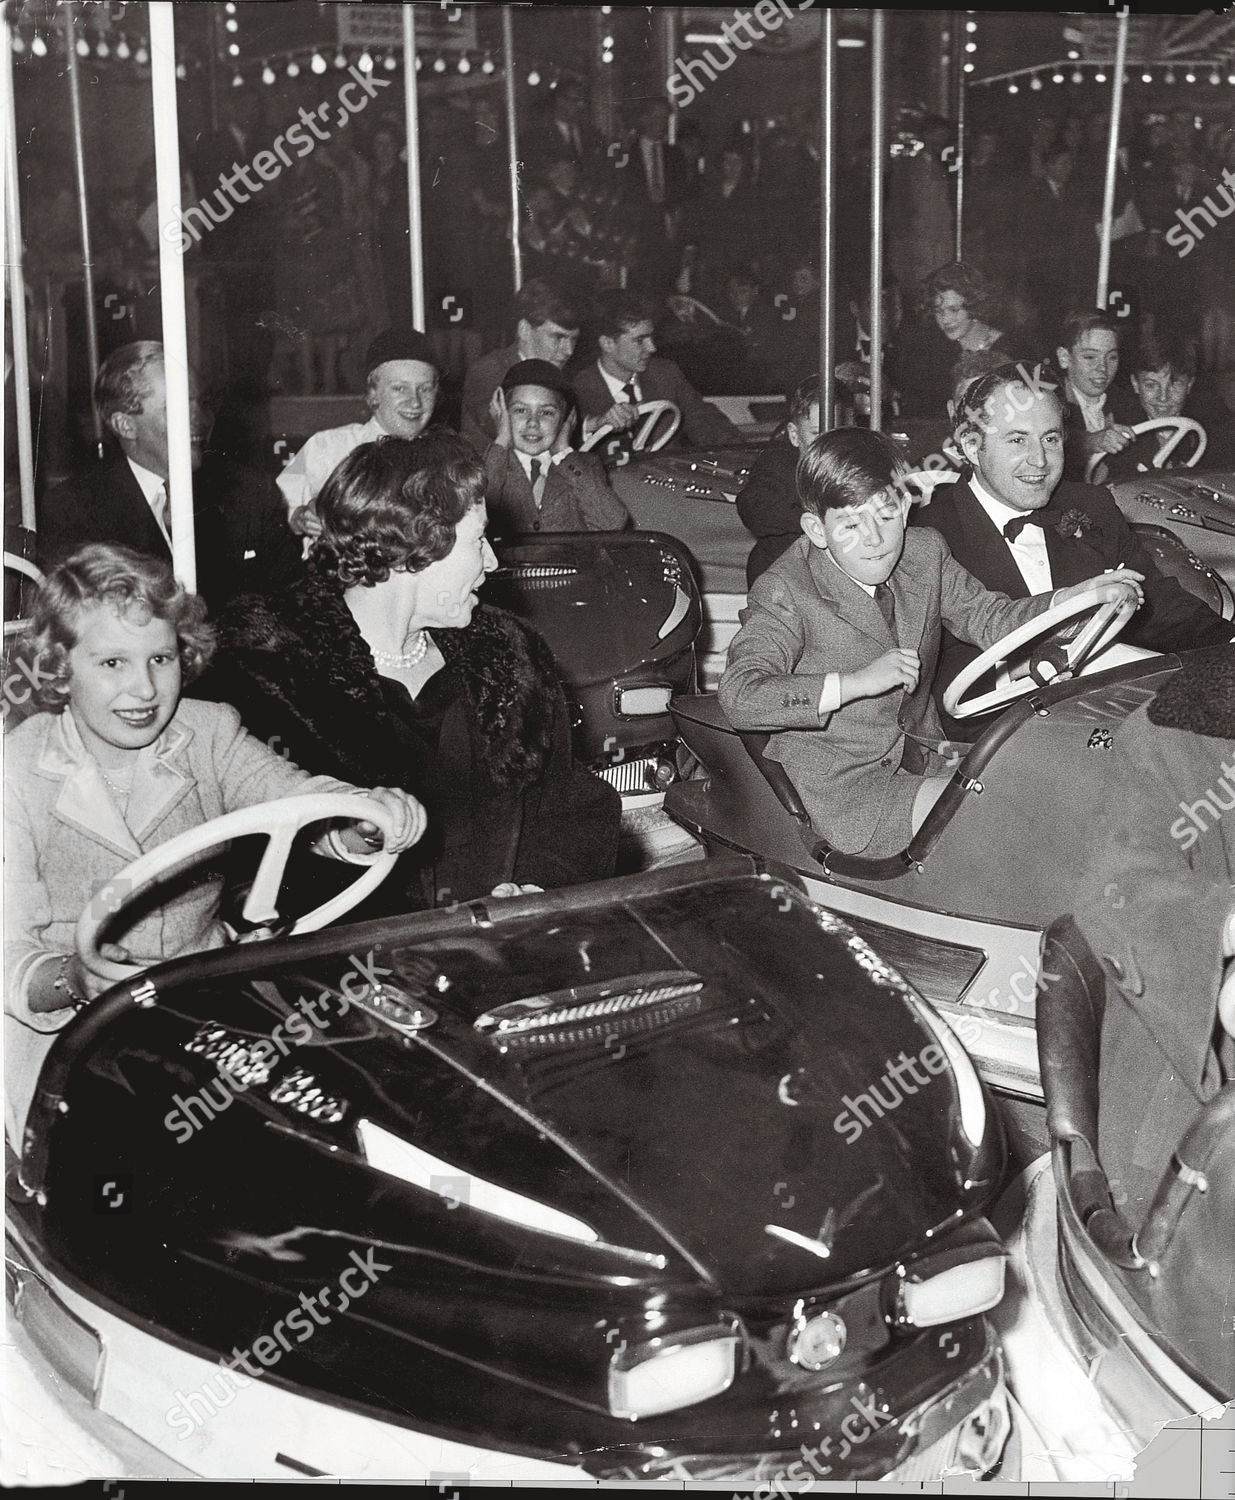 prince-charles-riding-the-dodgems-with-friends-in-december-1959-the-princess-royal-is-driving-the-other-dodgem-picture-as-used-in-the-mail-on-sunday-supplement-charles-the-princes-story-part-two-devoted-parents-strangers-to-each-other-written-b-shutterstock-editorial-884138a.jpg